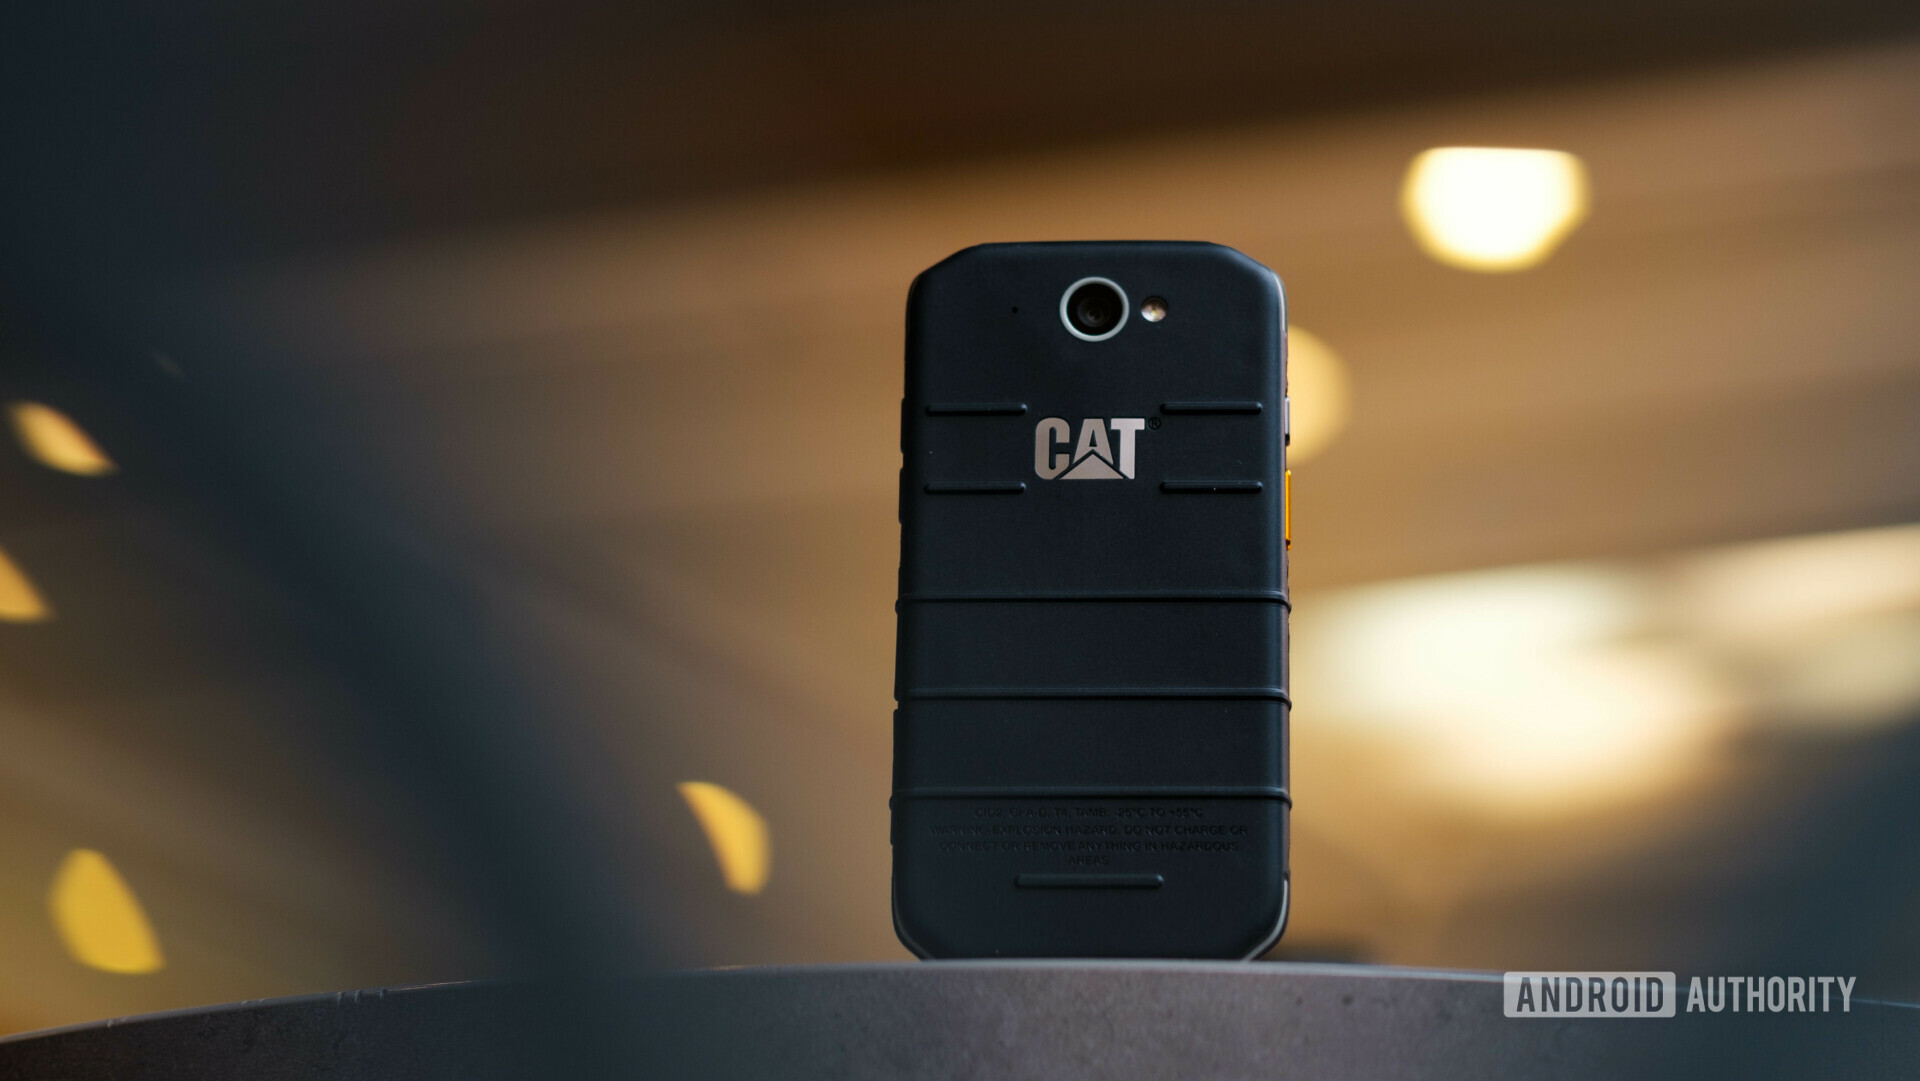 Hands On With The Cat S48c Rugged Phone Available Now On Verizon